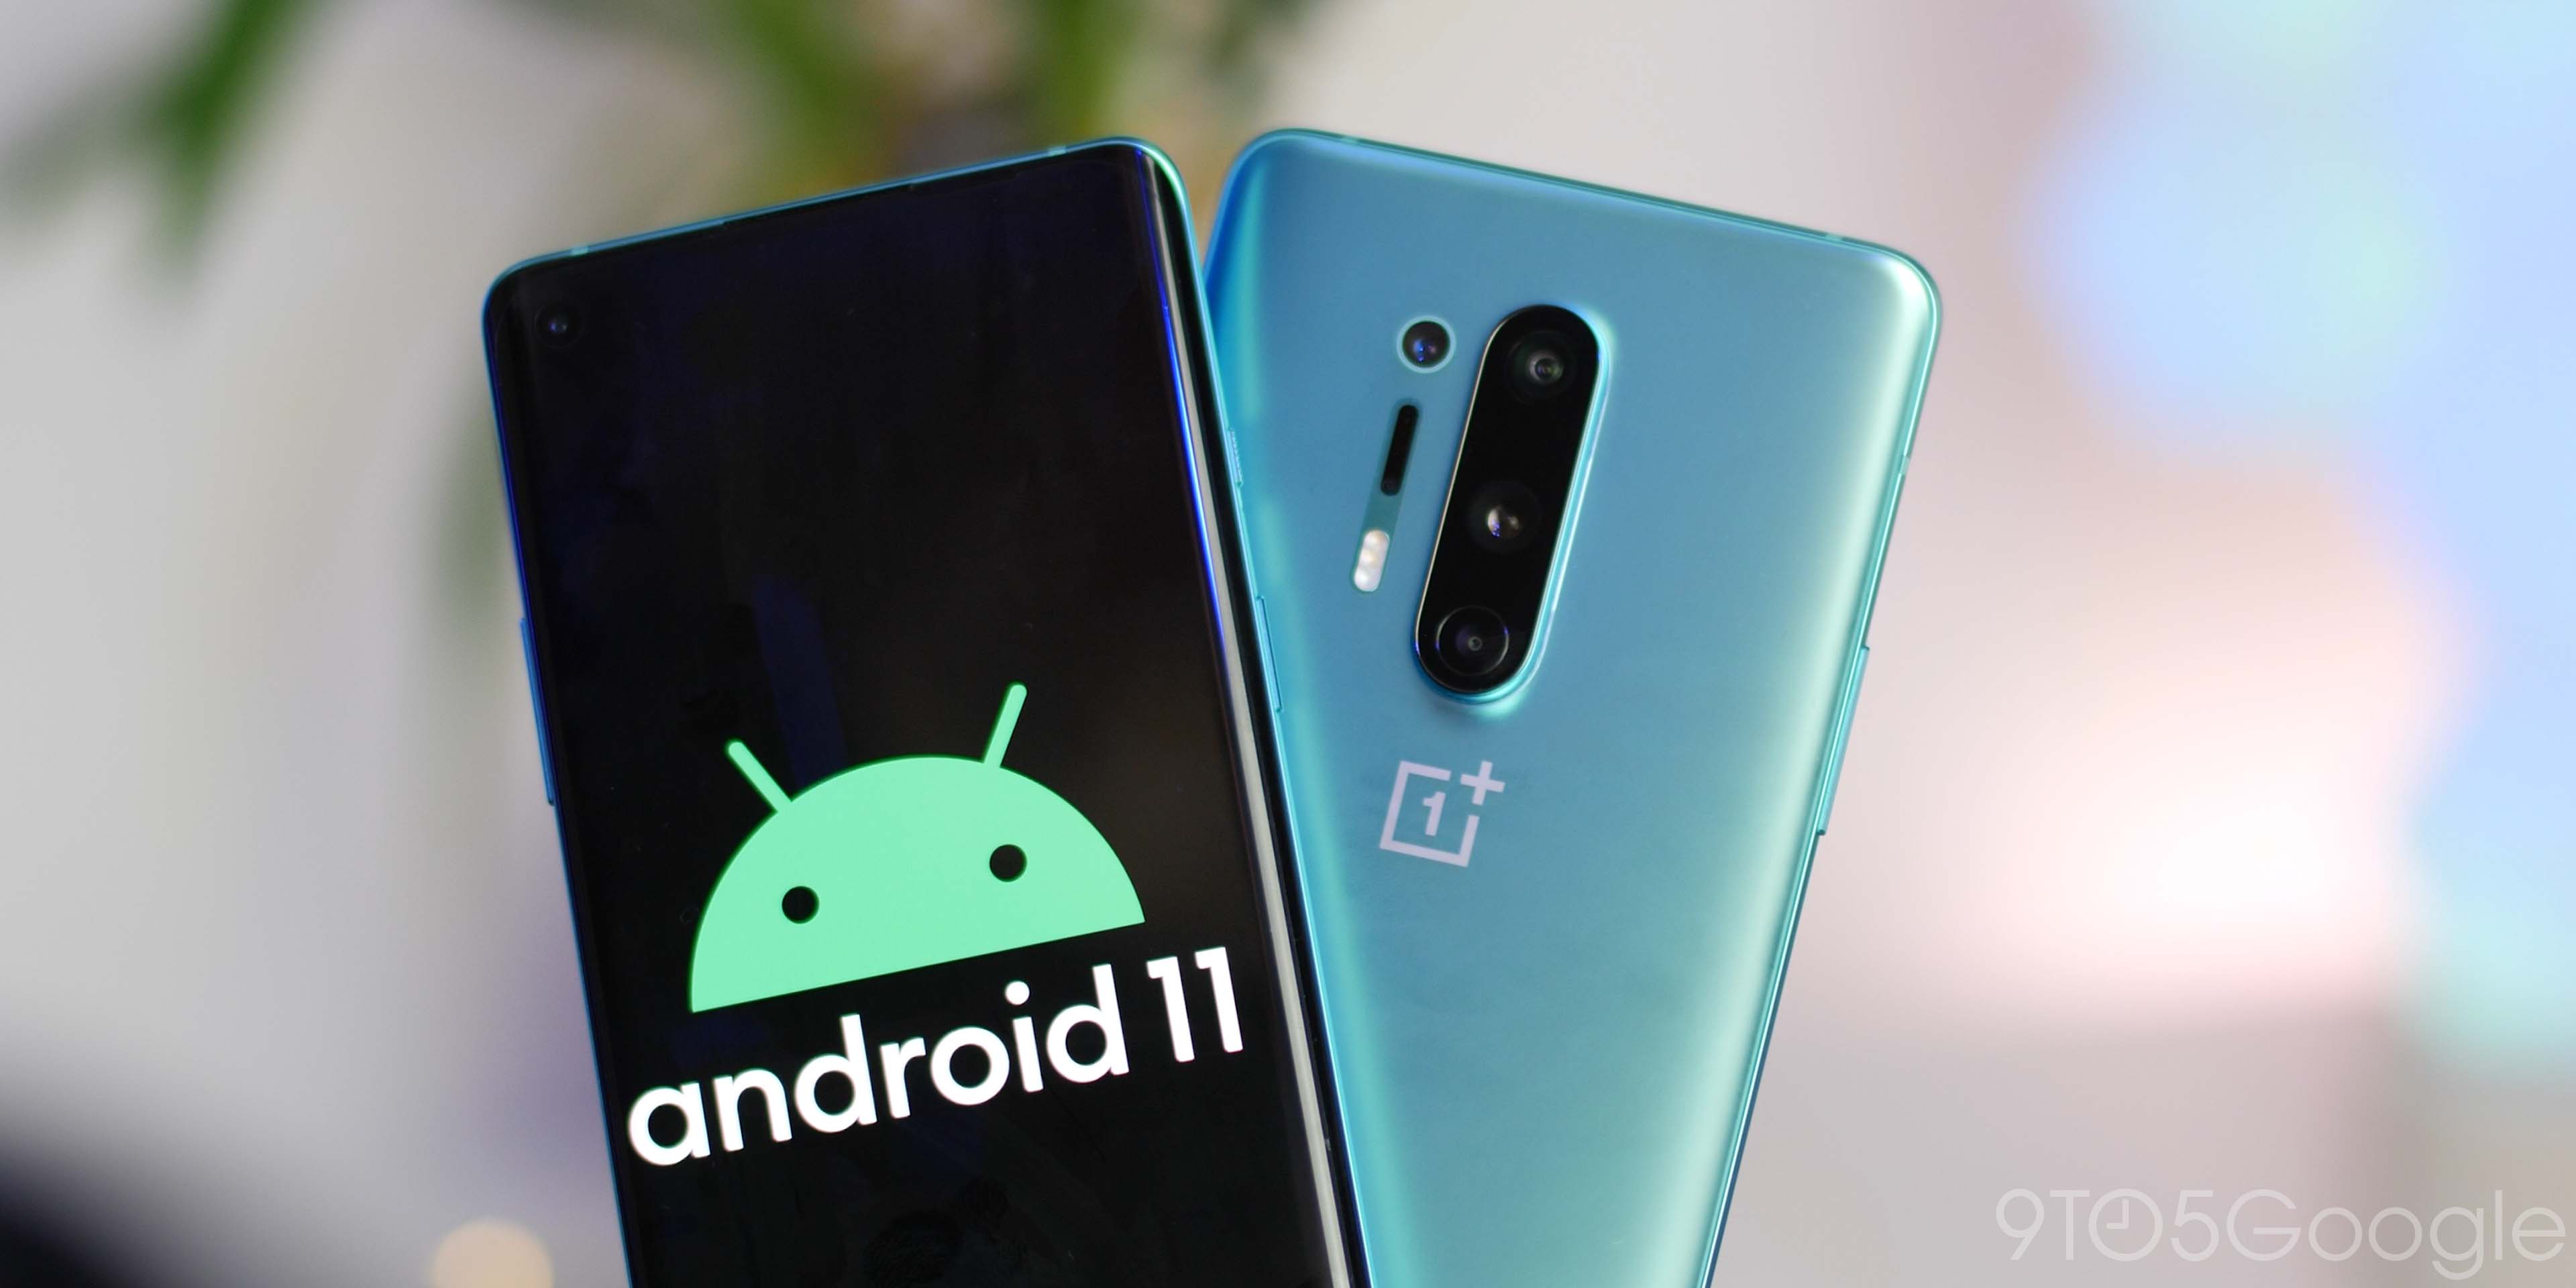 Android 11 Beta 2 Now Available For Oneplus 8 And 8 Pro 9to5google